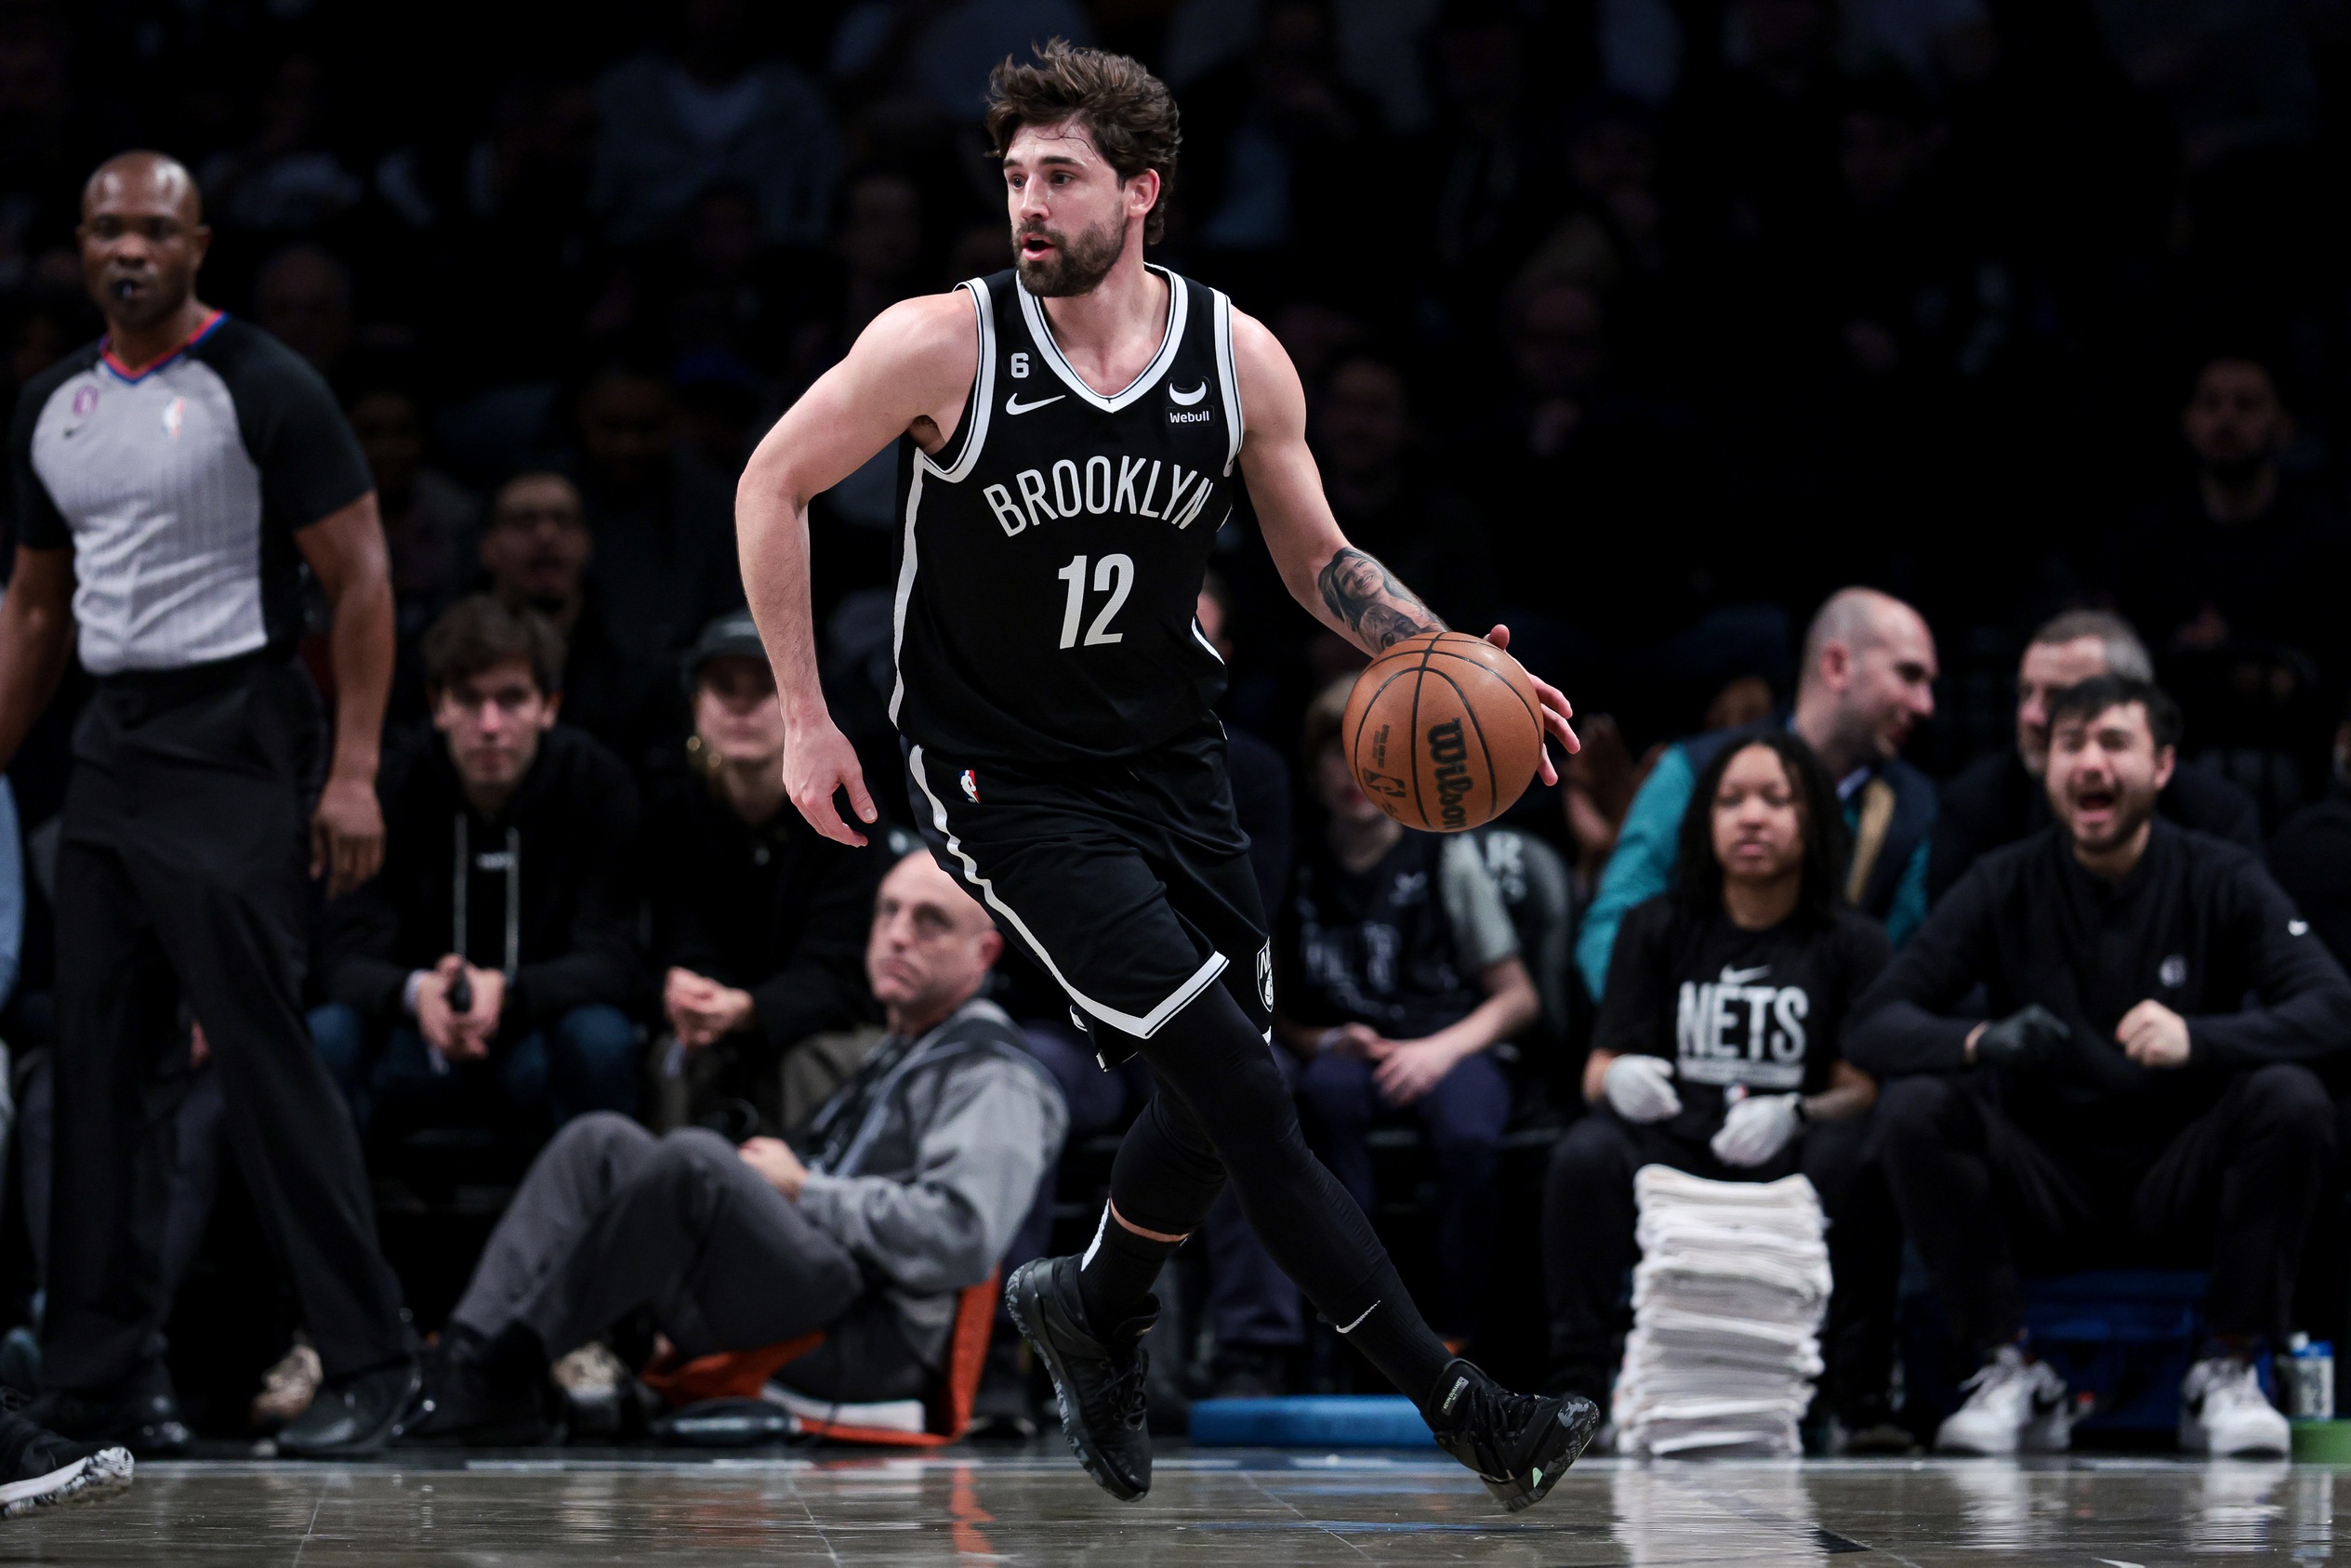 Joe Harris was traded from the Brooklyn Nets to the Detroit Pistons